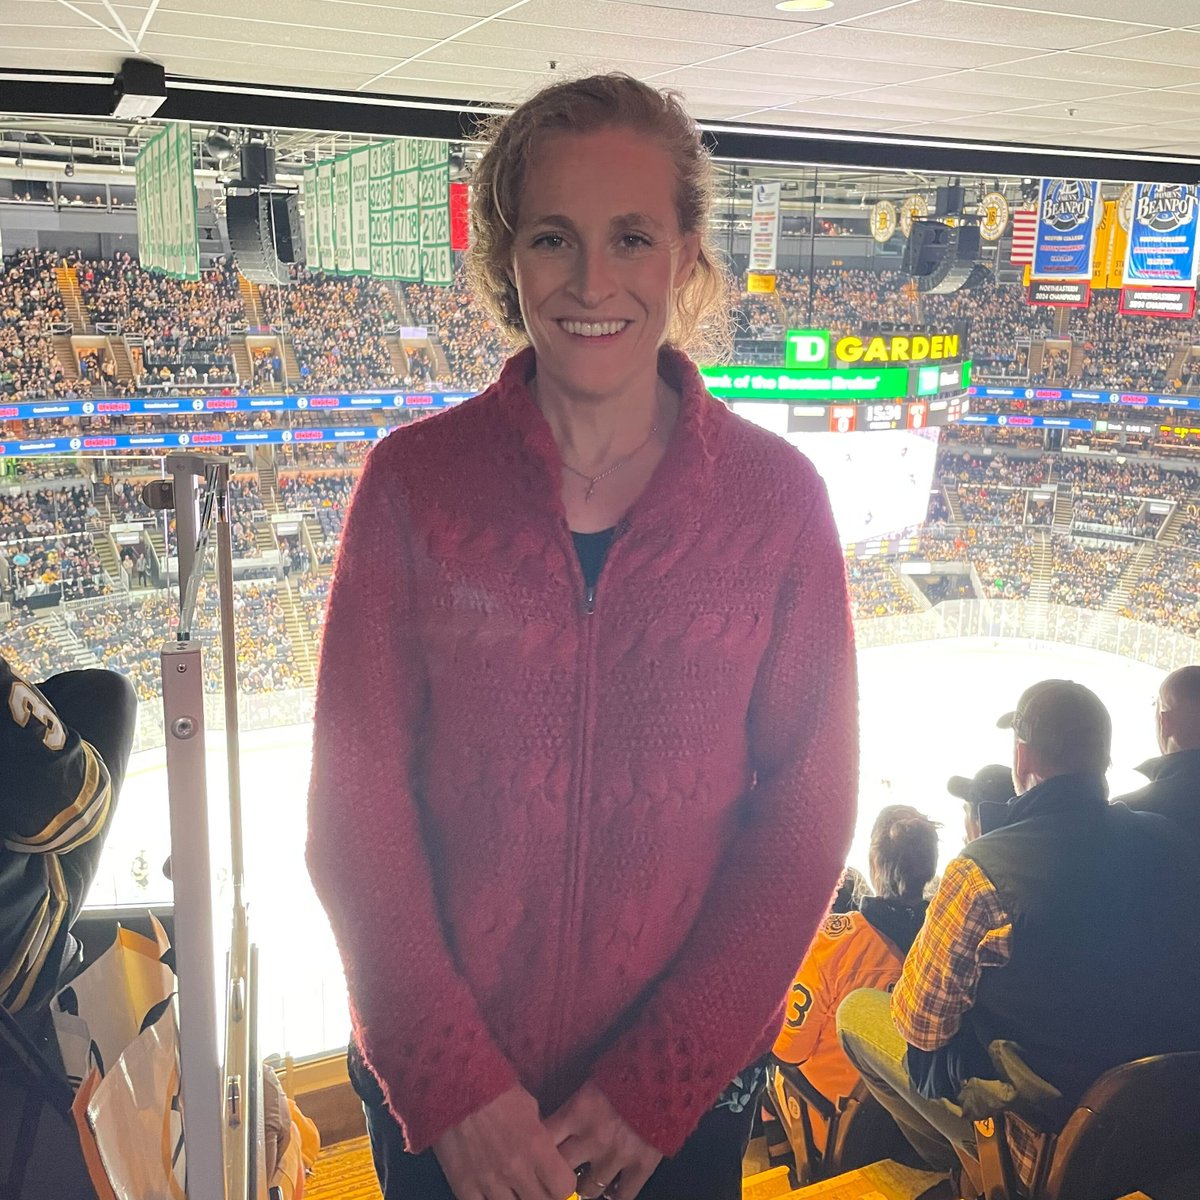 At Tuesday’s game, #NHLBruins & @mastatelottery honored Deanna McDevitt as Community All-Star. She is a fourth-generation firefighter for the Boston Fire Dept. and the 1st female District Chief in the dept. Nominate your own Community All-Star at bostonbruins.com/communityallst…